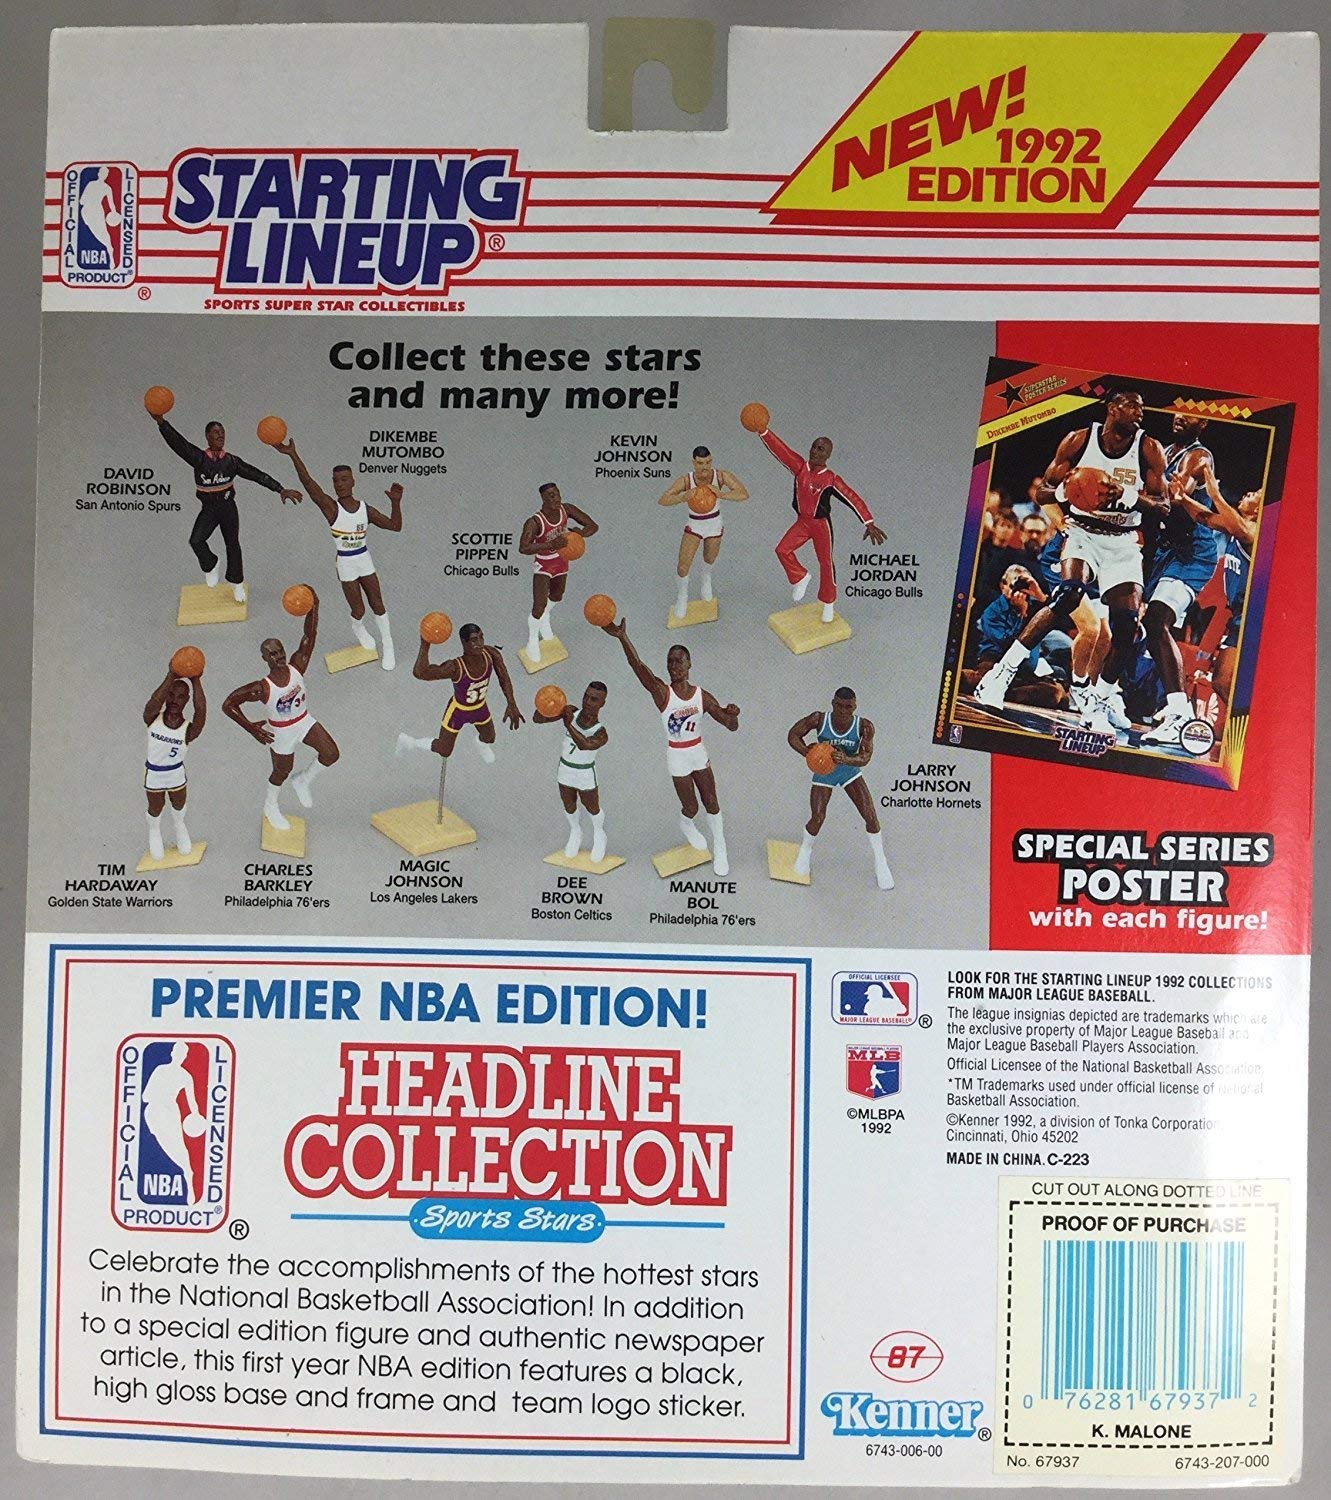 Starting Lineup KARL MALONE 1992 SPORTS ACTION FIGURE UTAH JAZZ WITH COLLECTORS CARD